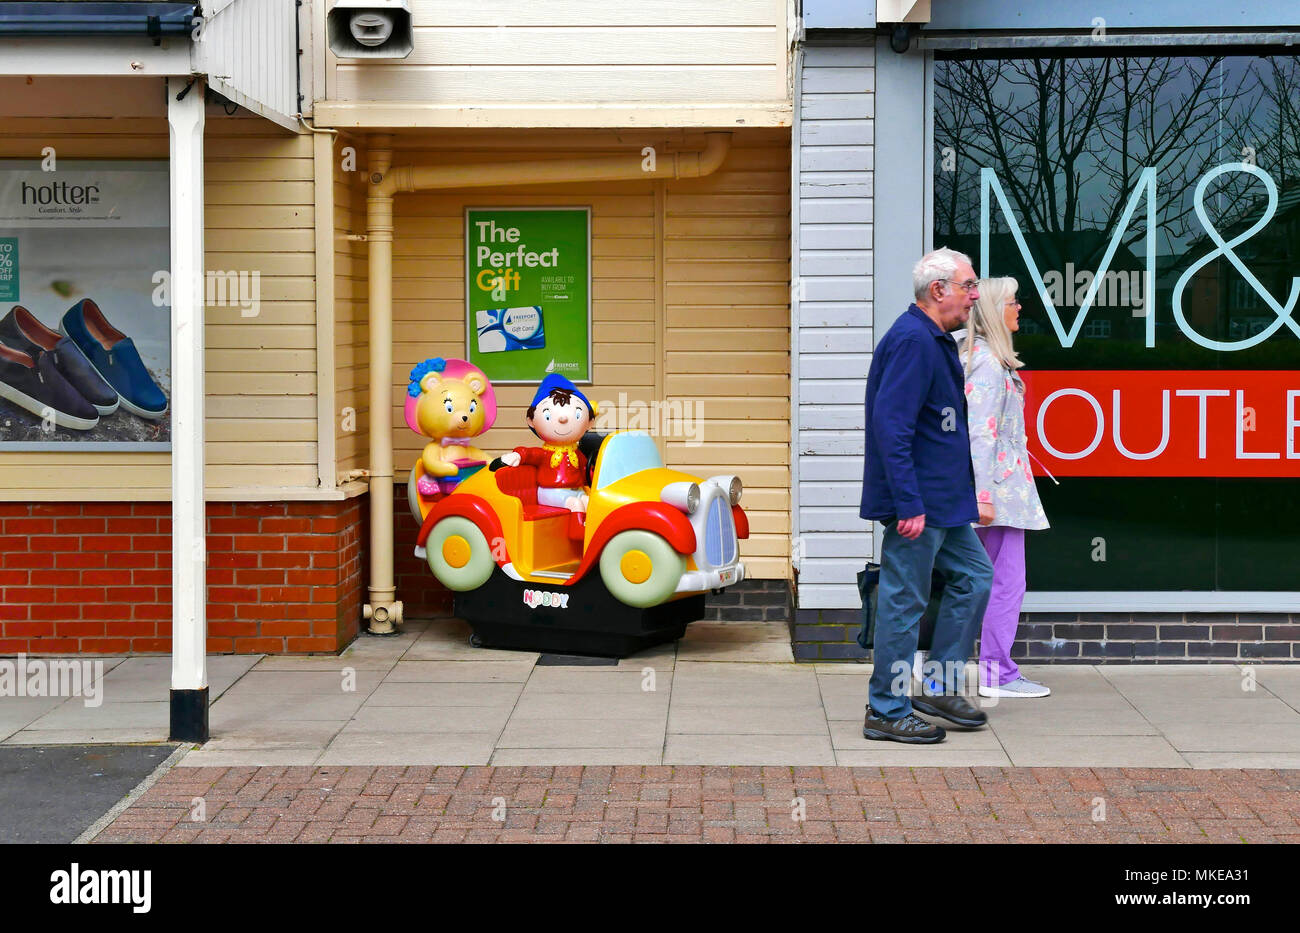 Middle aged couple in casual dress walking past childrens' Noddy Car ride Stock Photo